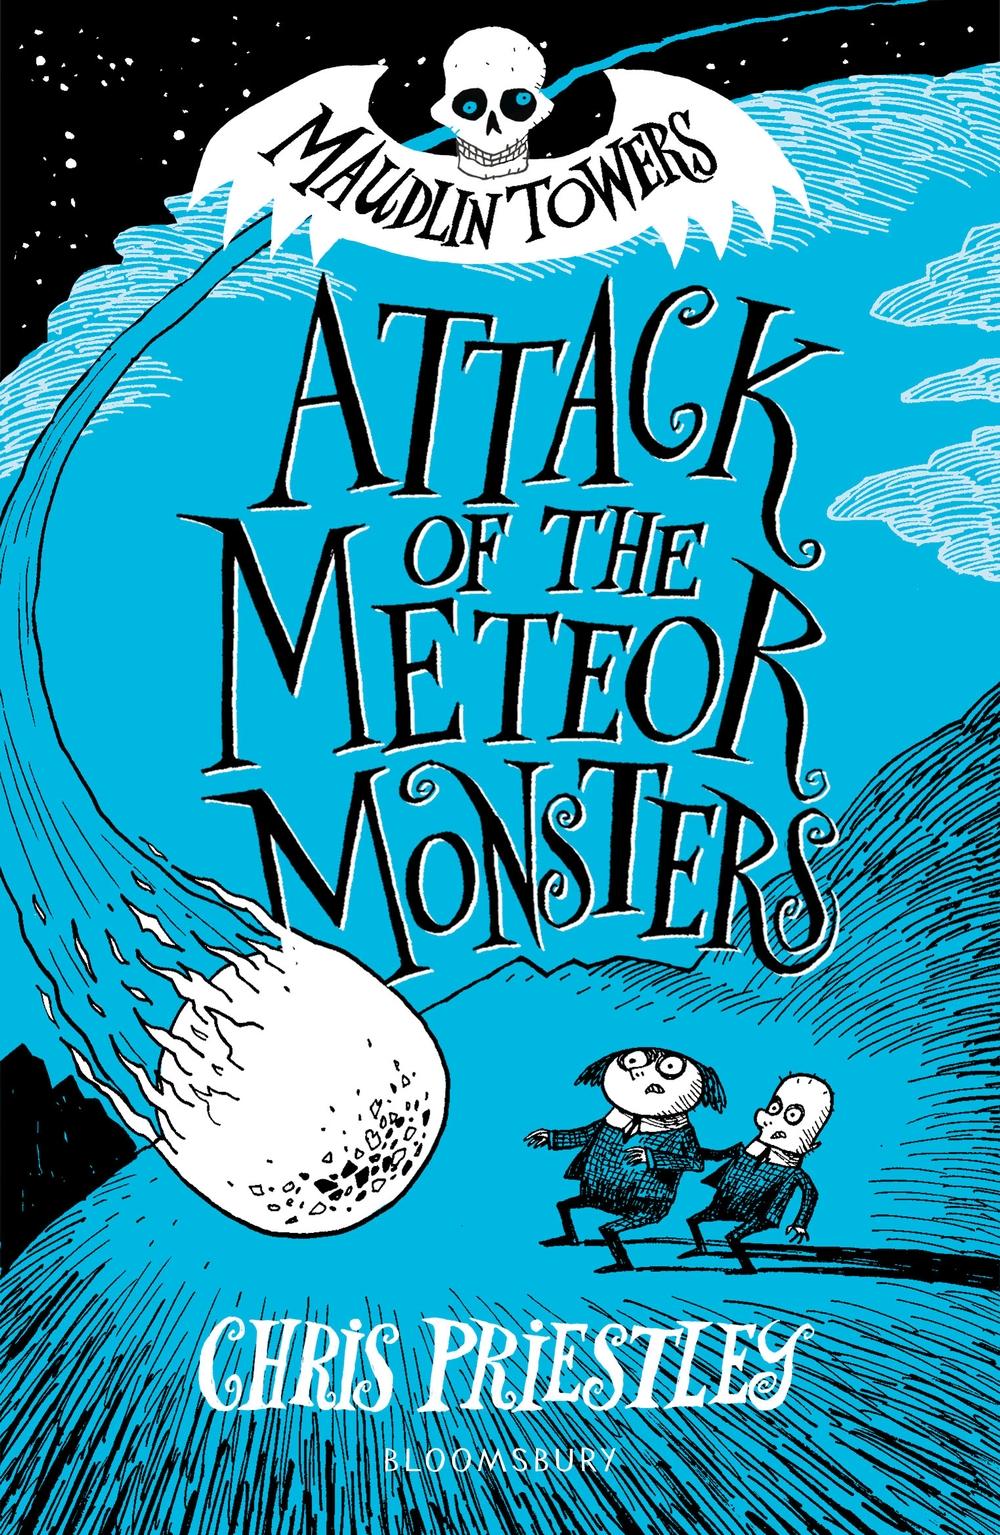 Attack of the Meteor Monsters - Chris Priestley